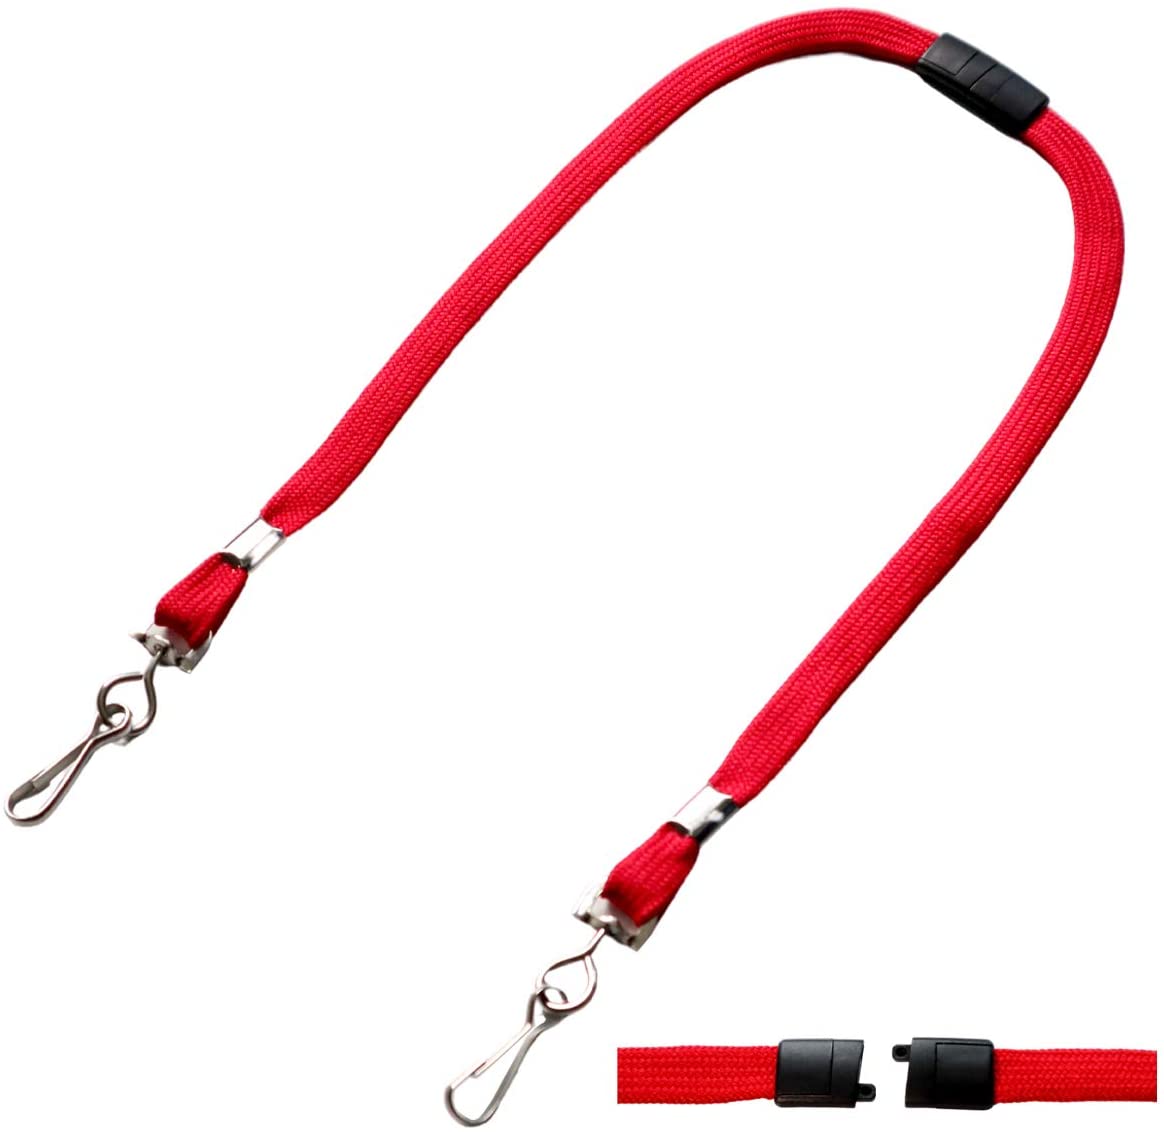 5 Pack - Double Ended Lanyards with Safety Breakaway Clasp - Small Size Ear Saver Holder with Swivel J Clips for Student Size - Short 12.5 Length